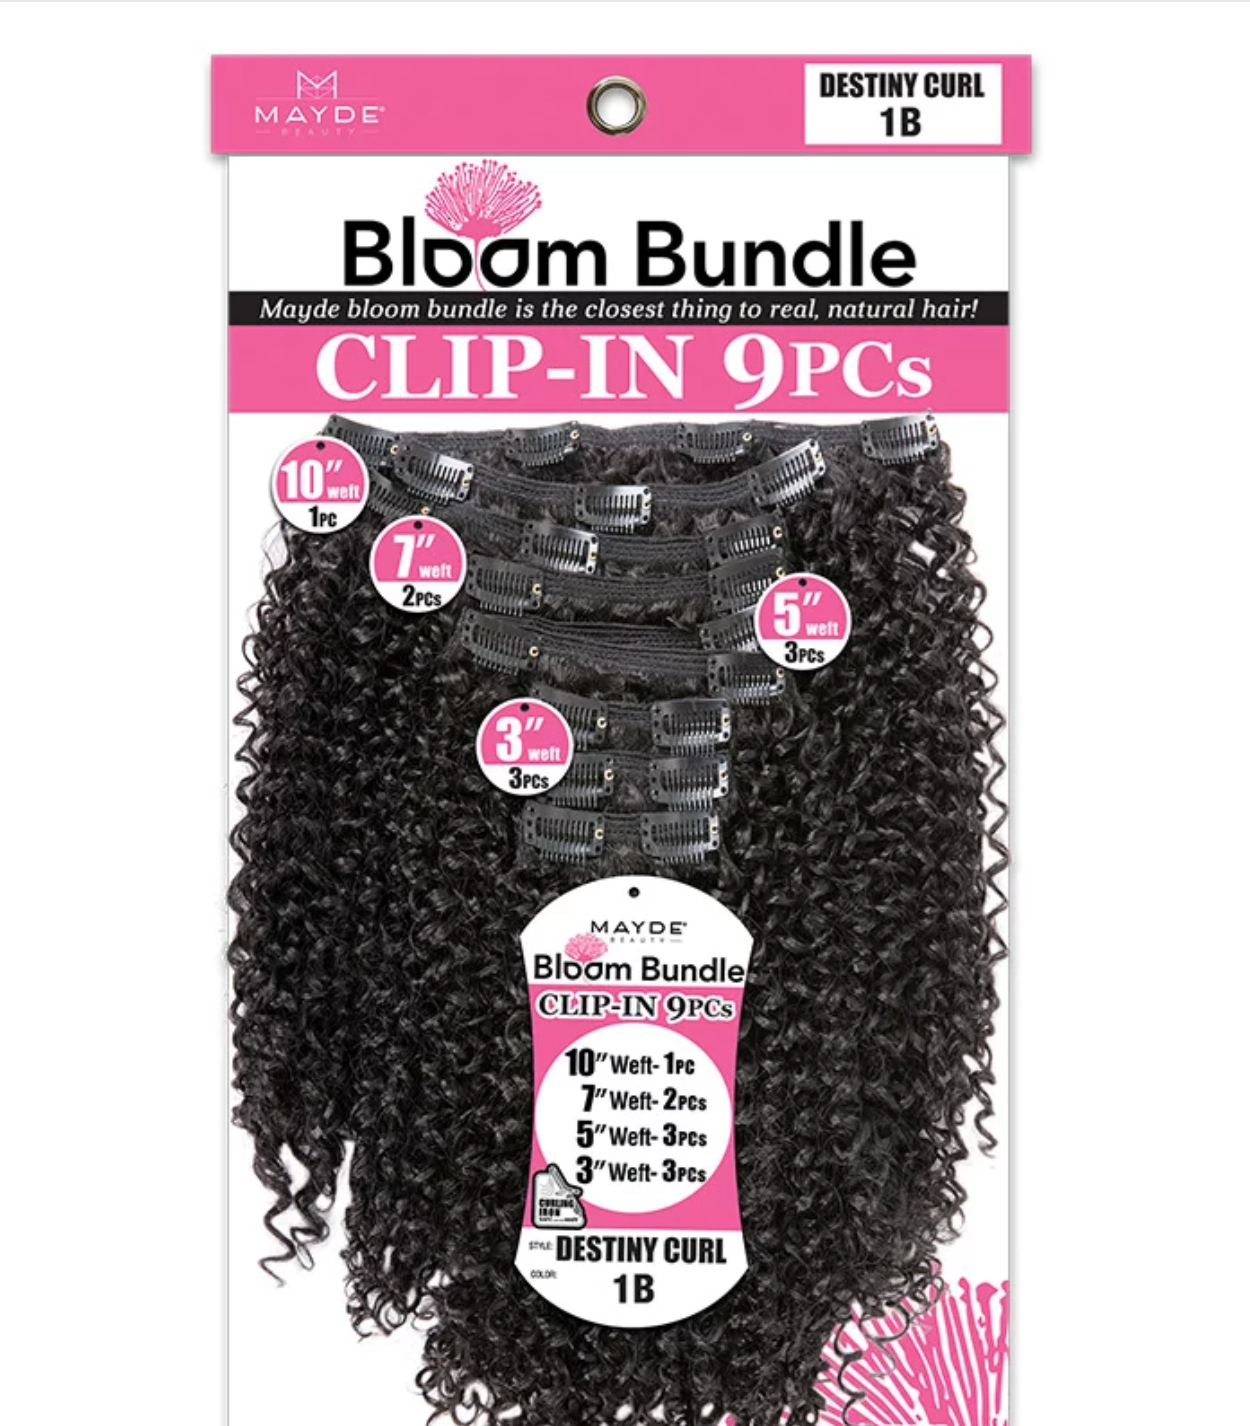 Mayde Beauty Bloom Bundle Synthetic Hair Clip-In 9pcs - Destiny Curl